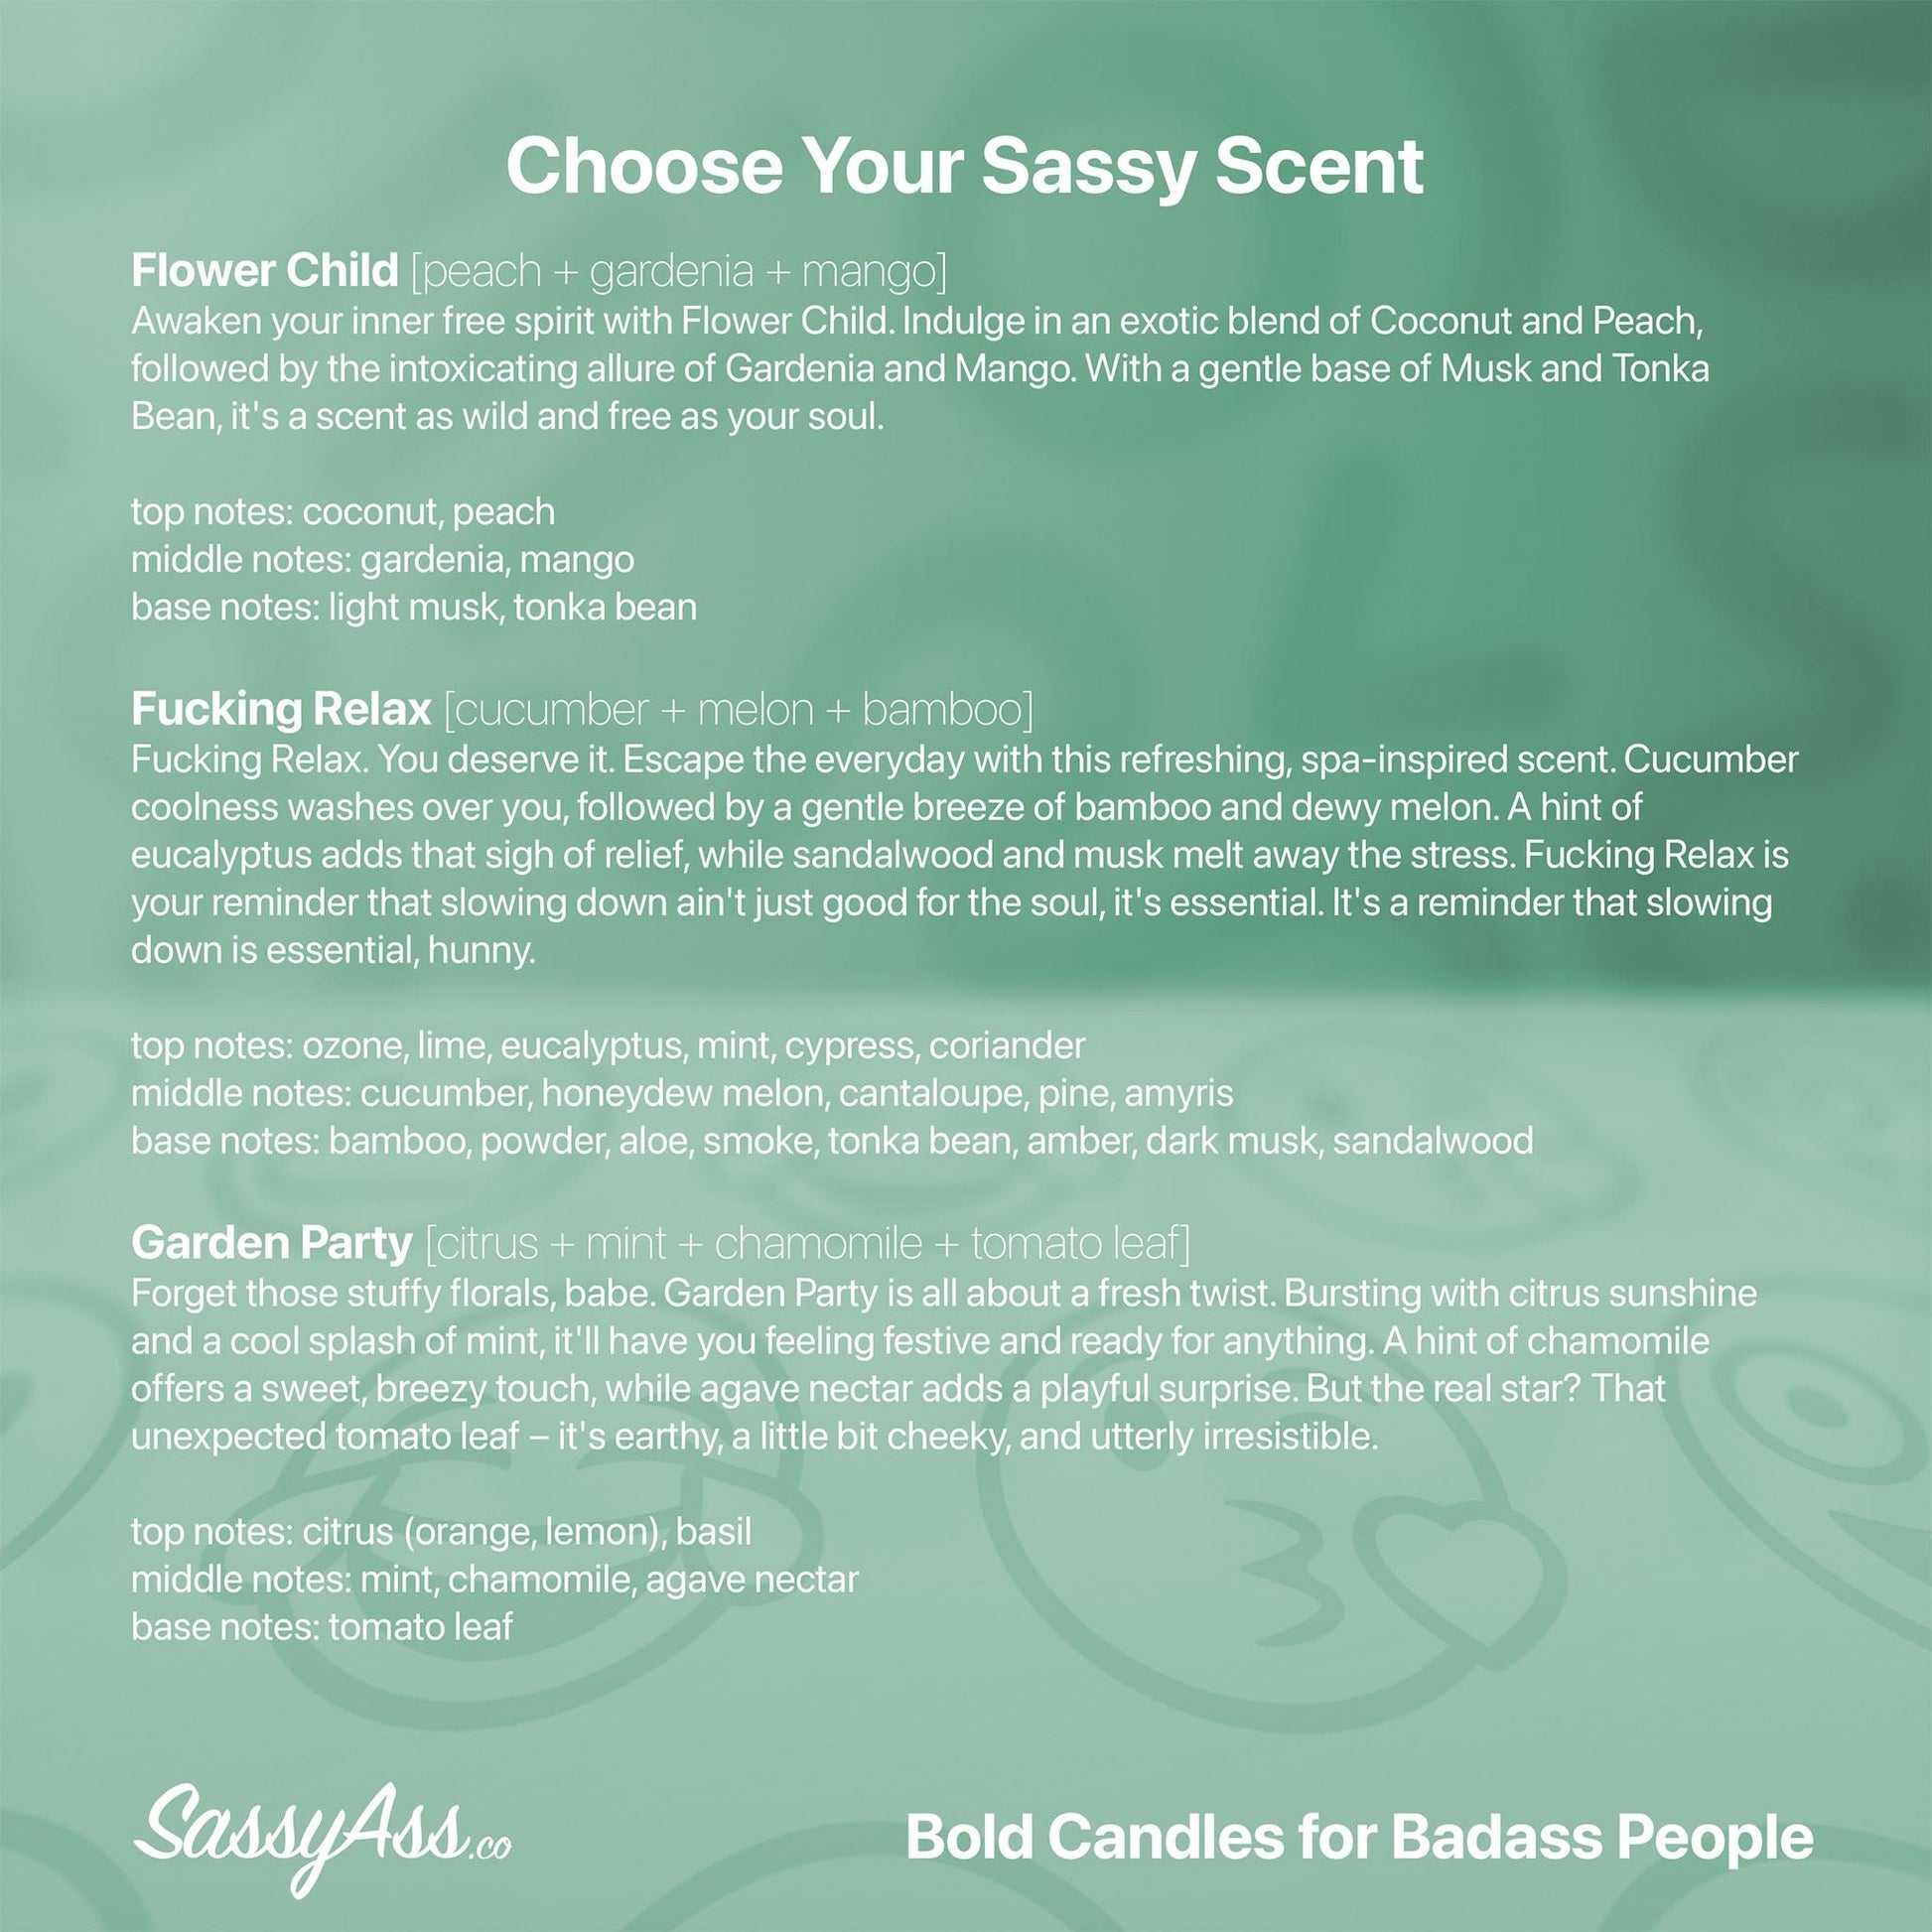 I Like Your Cock - Scented Soy Candle, Adult Humor, Naughty Gift, Cheeky, LGBTQIA+, Love, Organic, Vegan, Hand-Poured, Sexy, Nice Dick - the back cover of the book choose your sassy scent - SassyAss.co